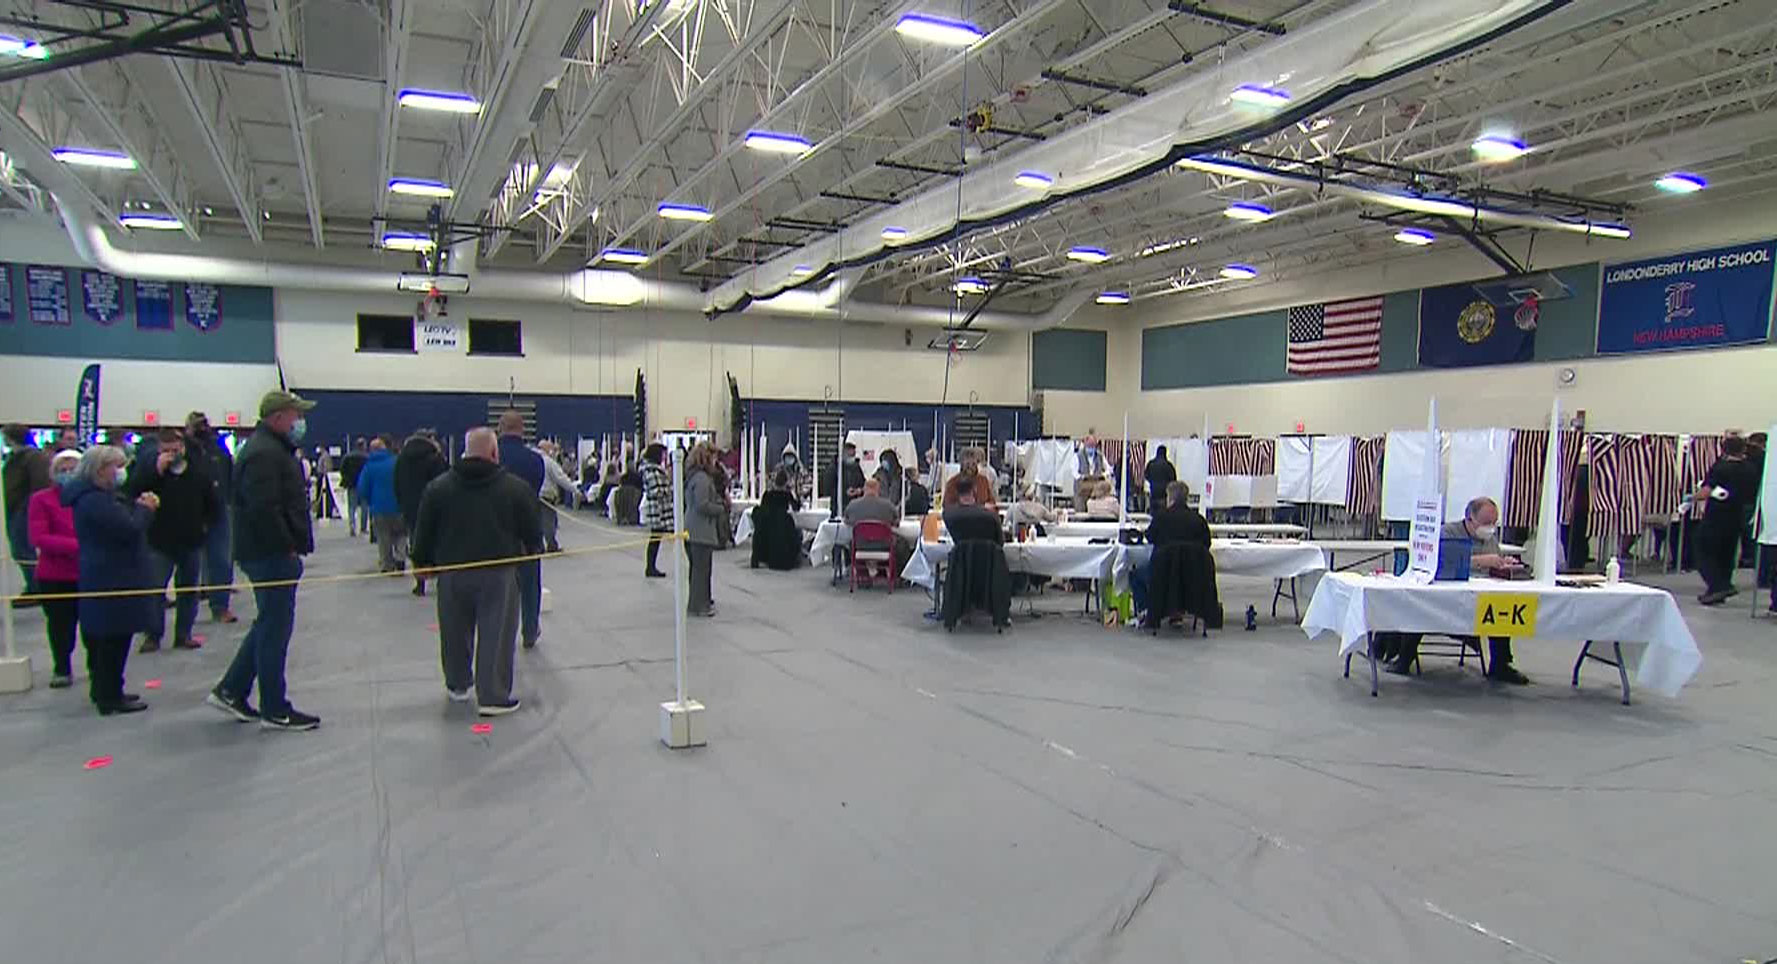 Voters wait to cast their ballots at New Hampshire’s second largest polling place, Londonderry High School’s gym, on November 3.